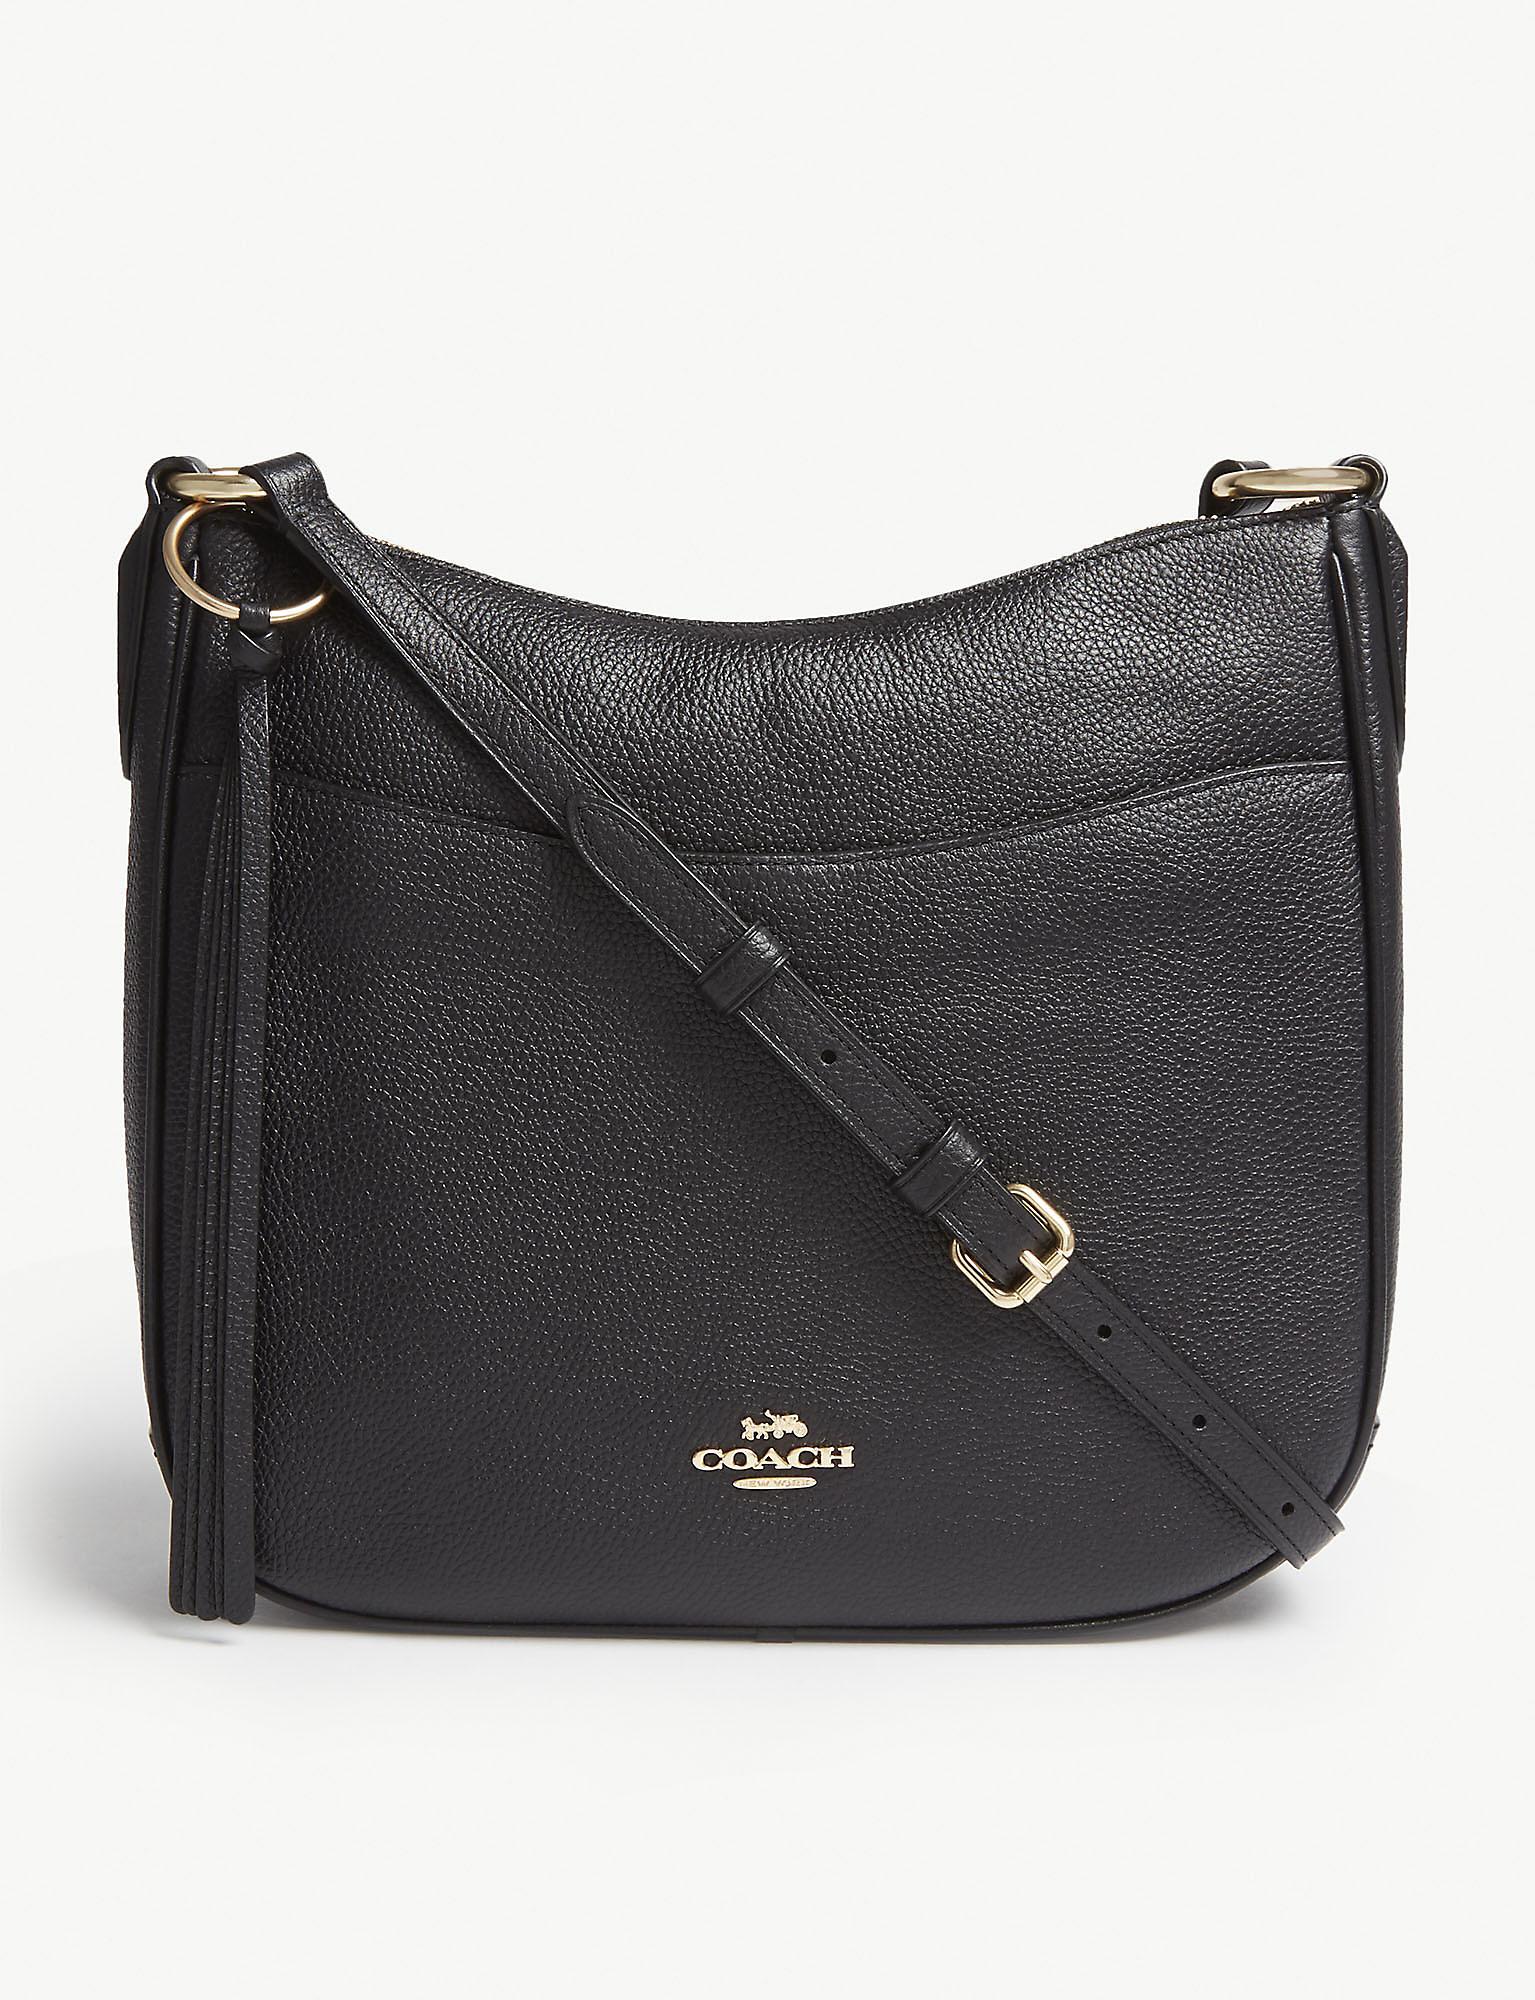 COACH Chaise Leather Cross-body Bag in gd/Black (Black) - Save 20% - Lyst